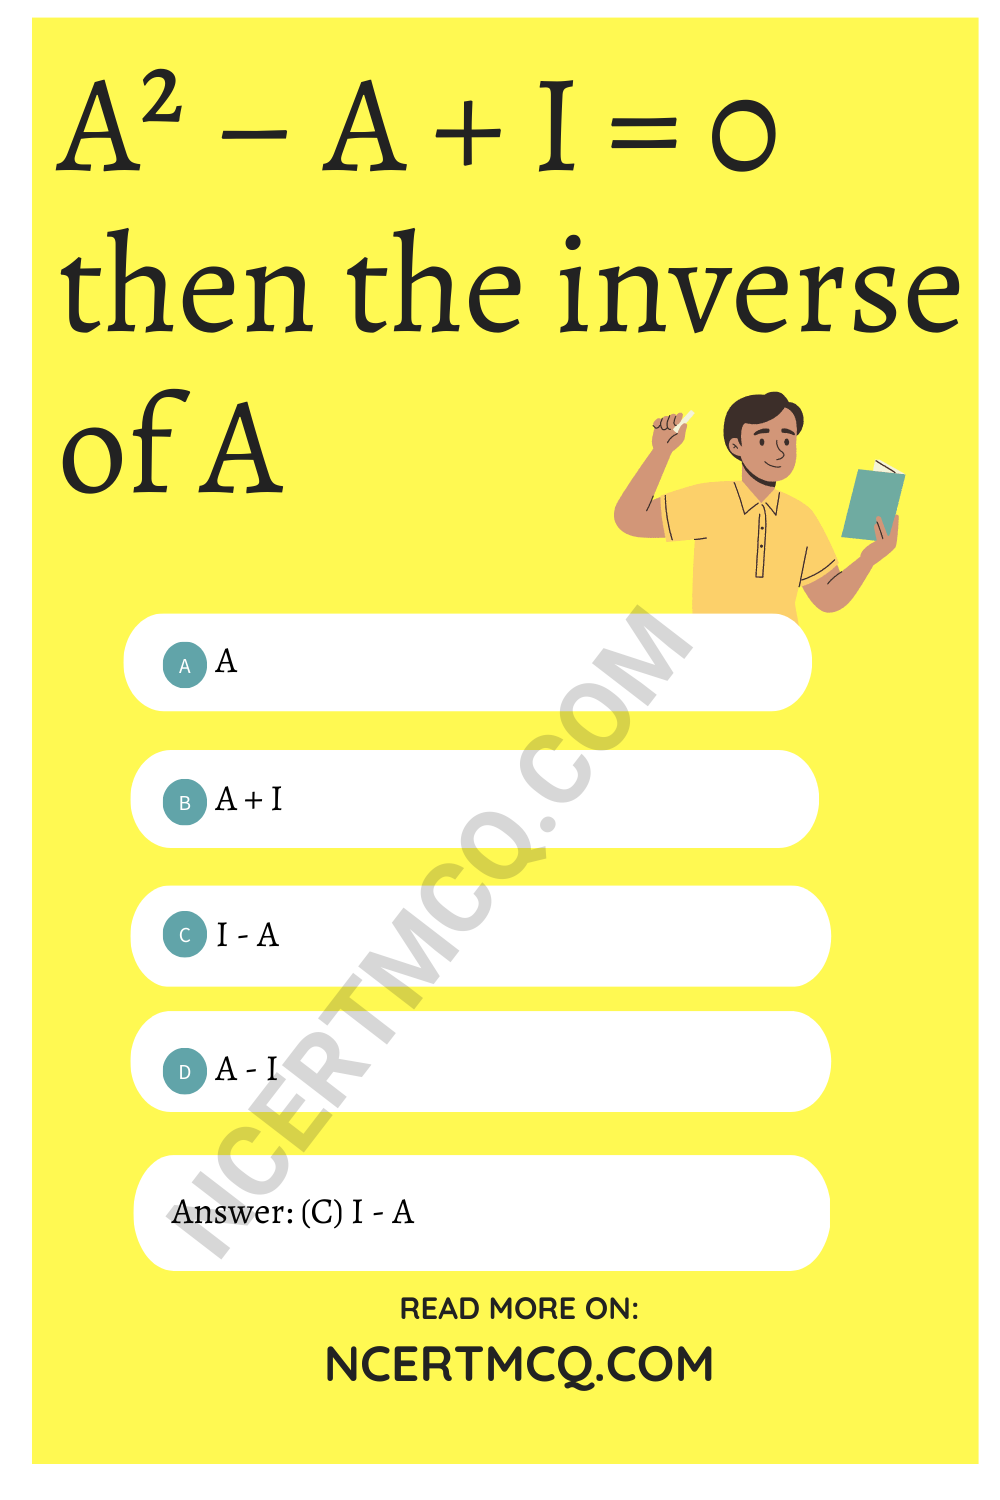 A² – A + I = 0 then the inverse of A